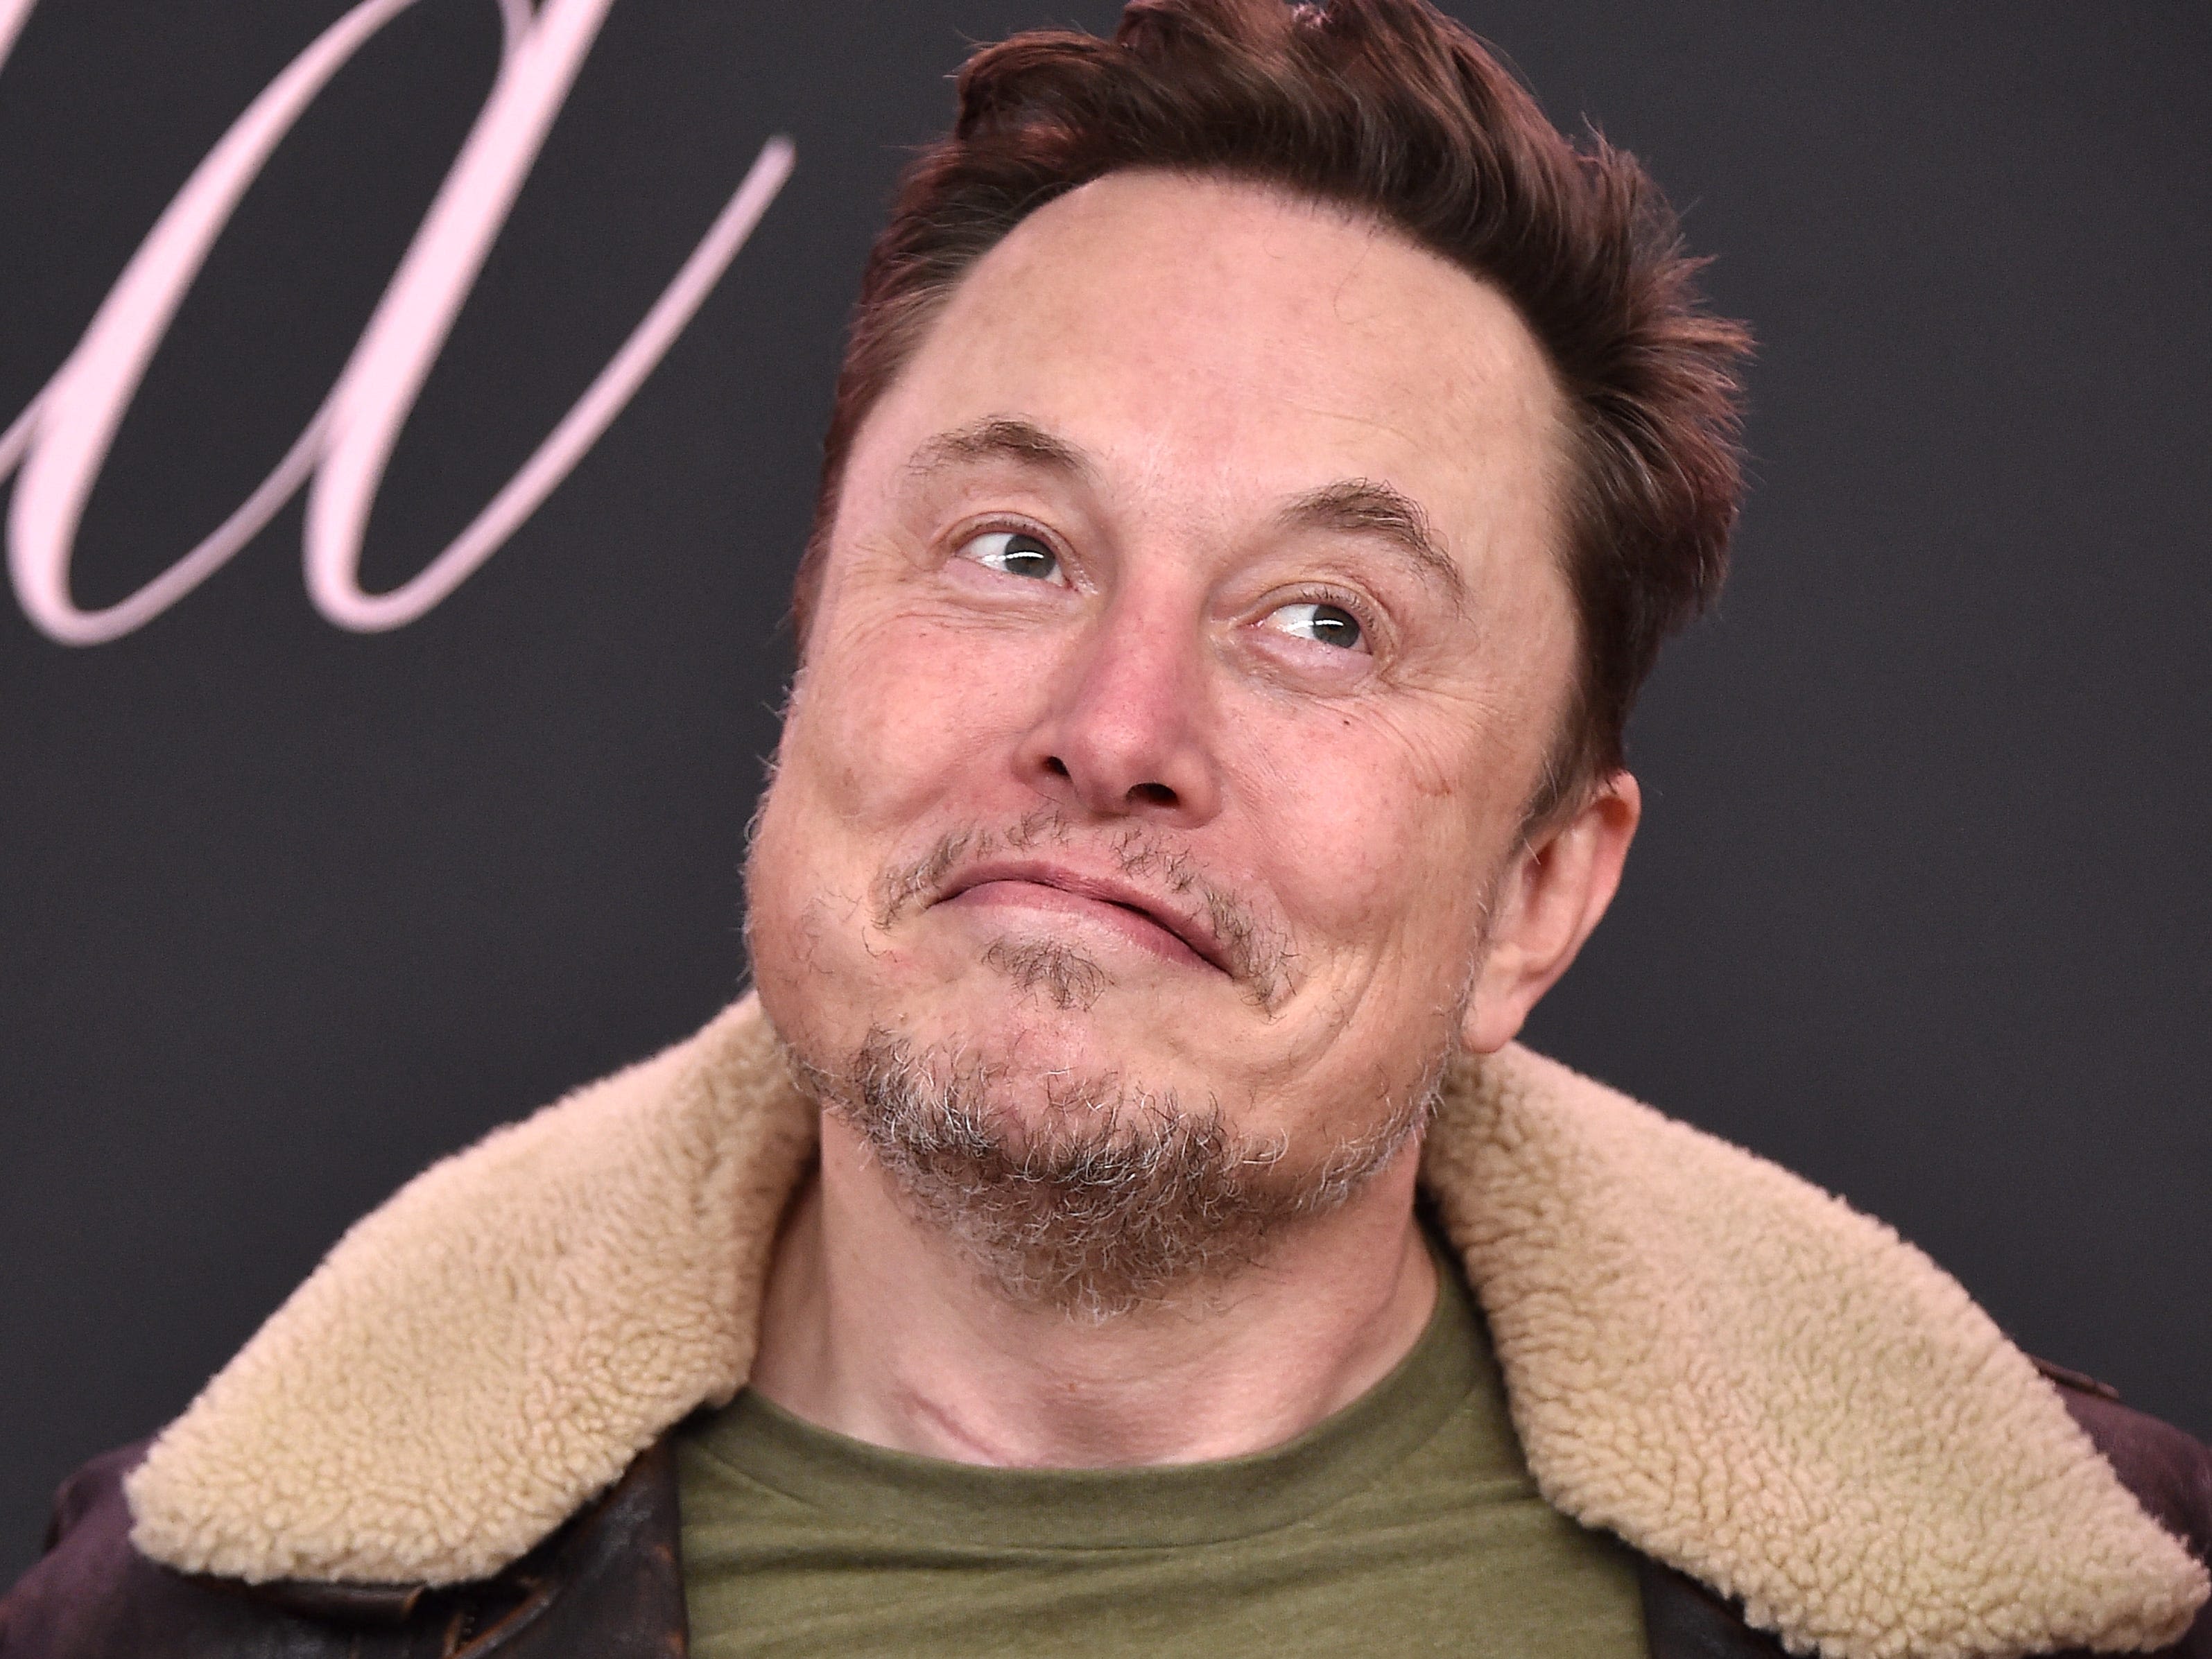 Elon Musk had a 'hilarious' way of asking if an ex-Twitter exec wanted to work for him